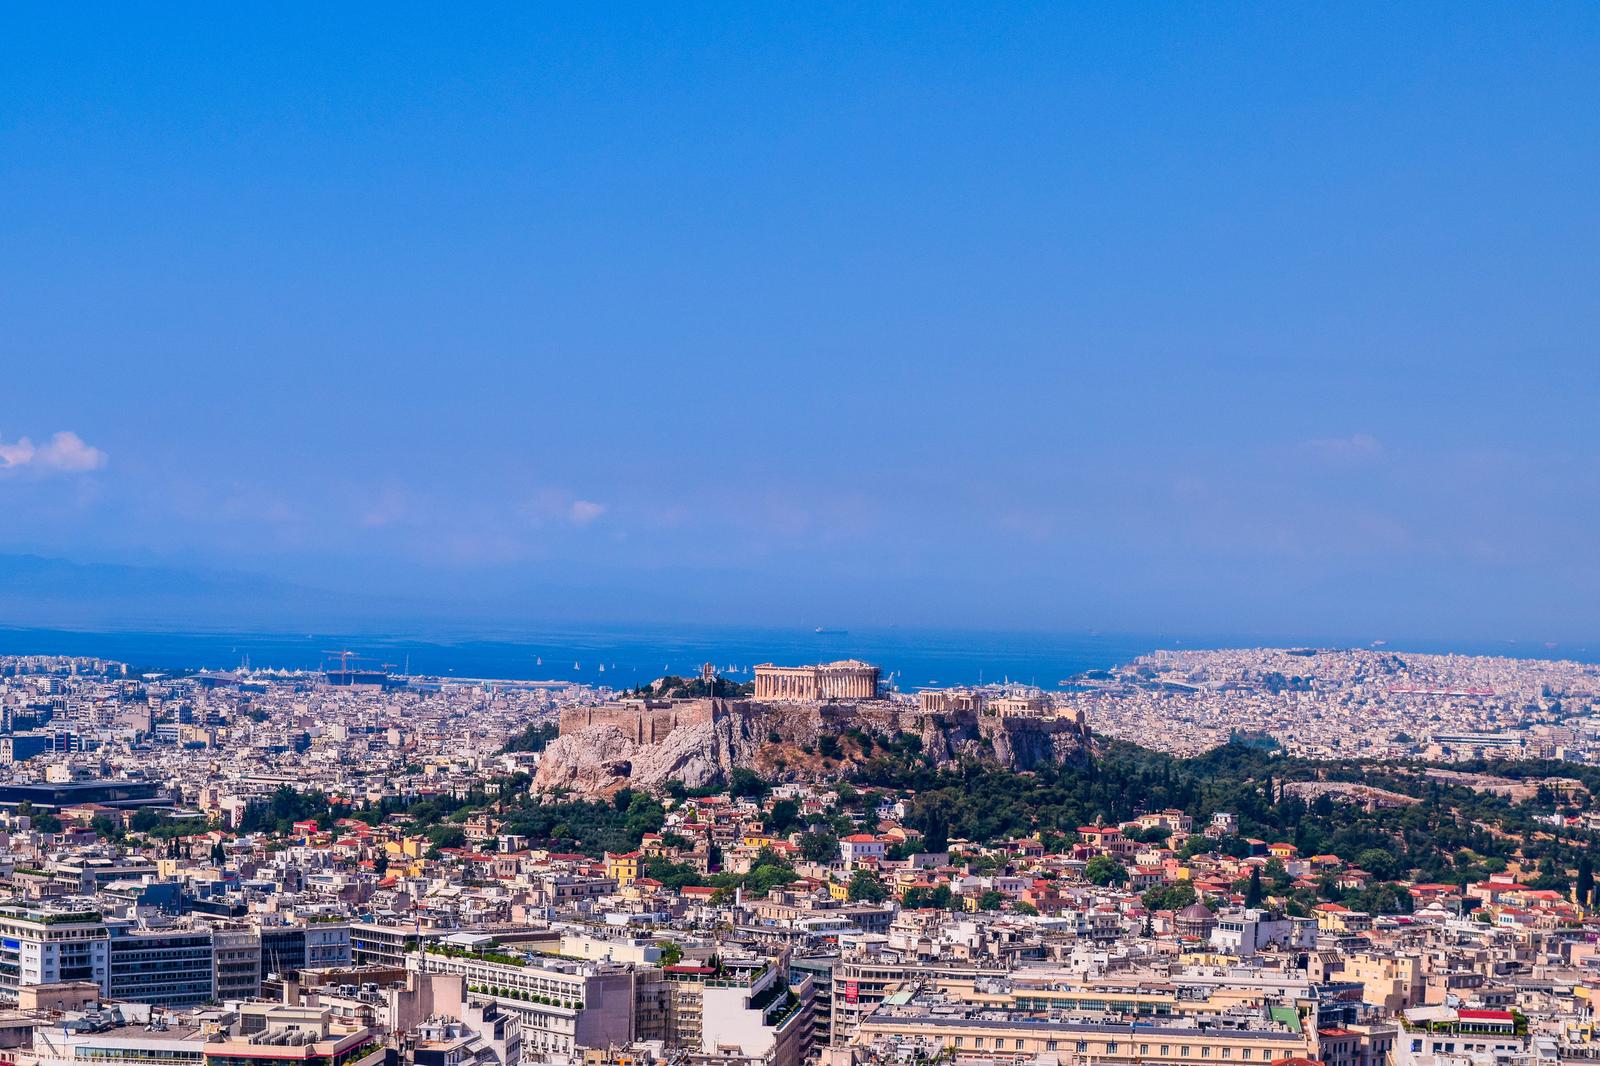 View of the Acropolis from Mount Lycabettus